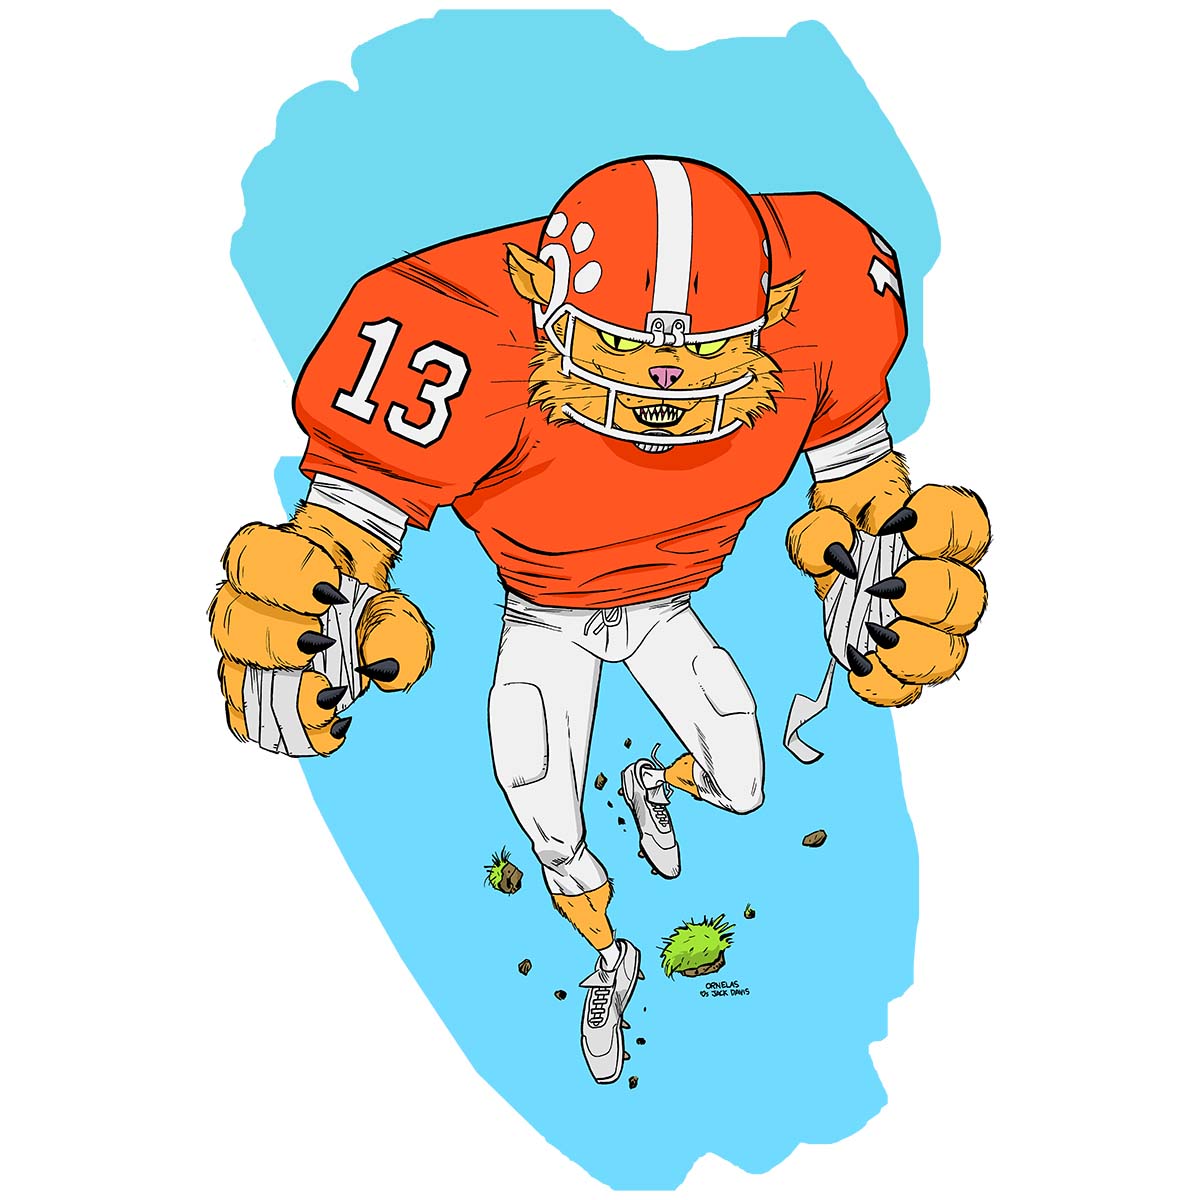 Recent commission. I was asked to approximate an Jack Davis style, no easy feat. Ink on Bristol. Digital Colors.
#BuyOrnelasArt #commissionsopen #supportlocalartists #shopsmall #supportindieartist #WildcatsFootball
#JackDavisHomage #footballart